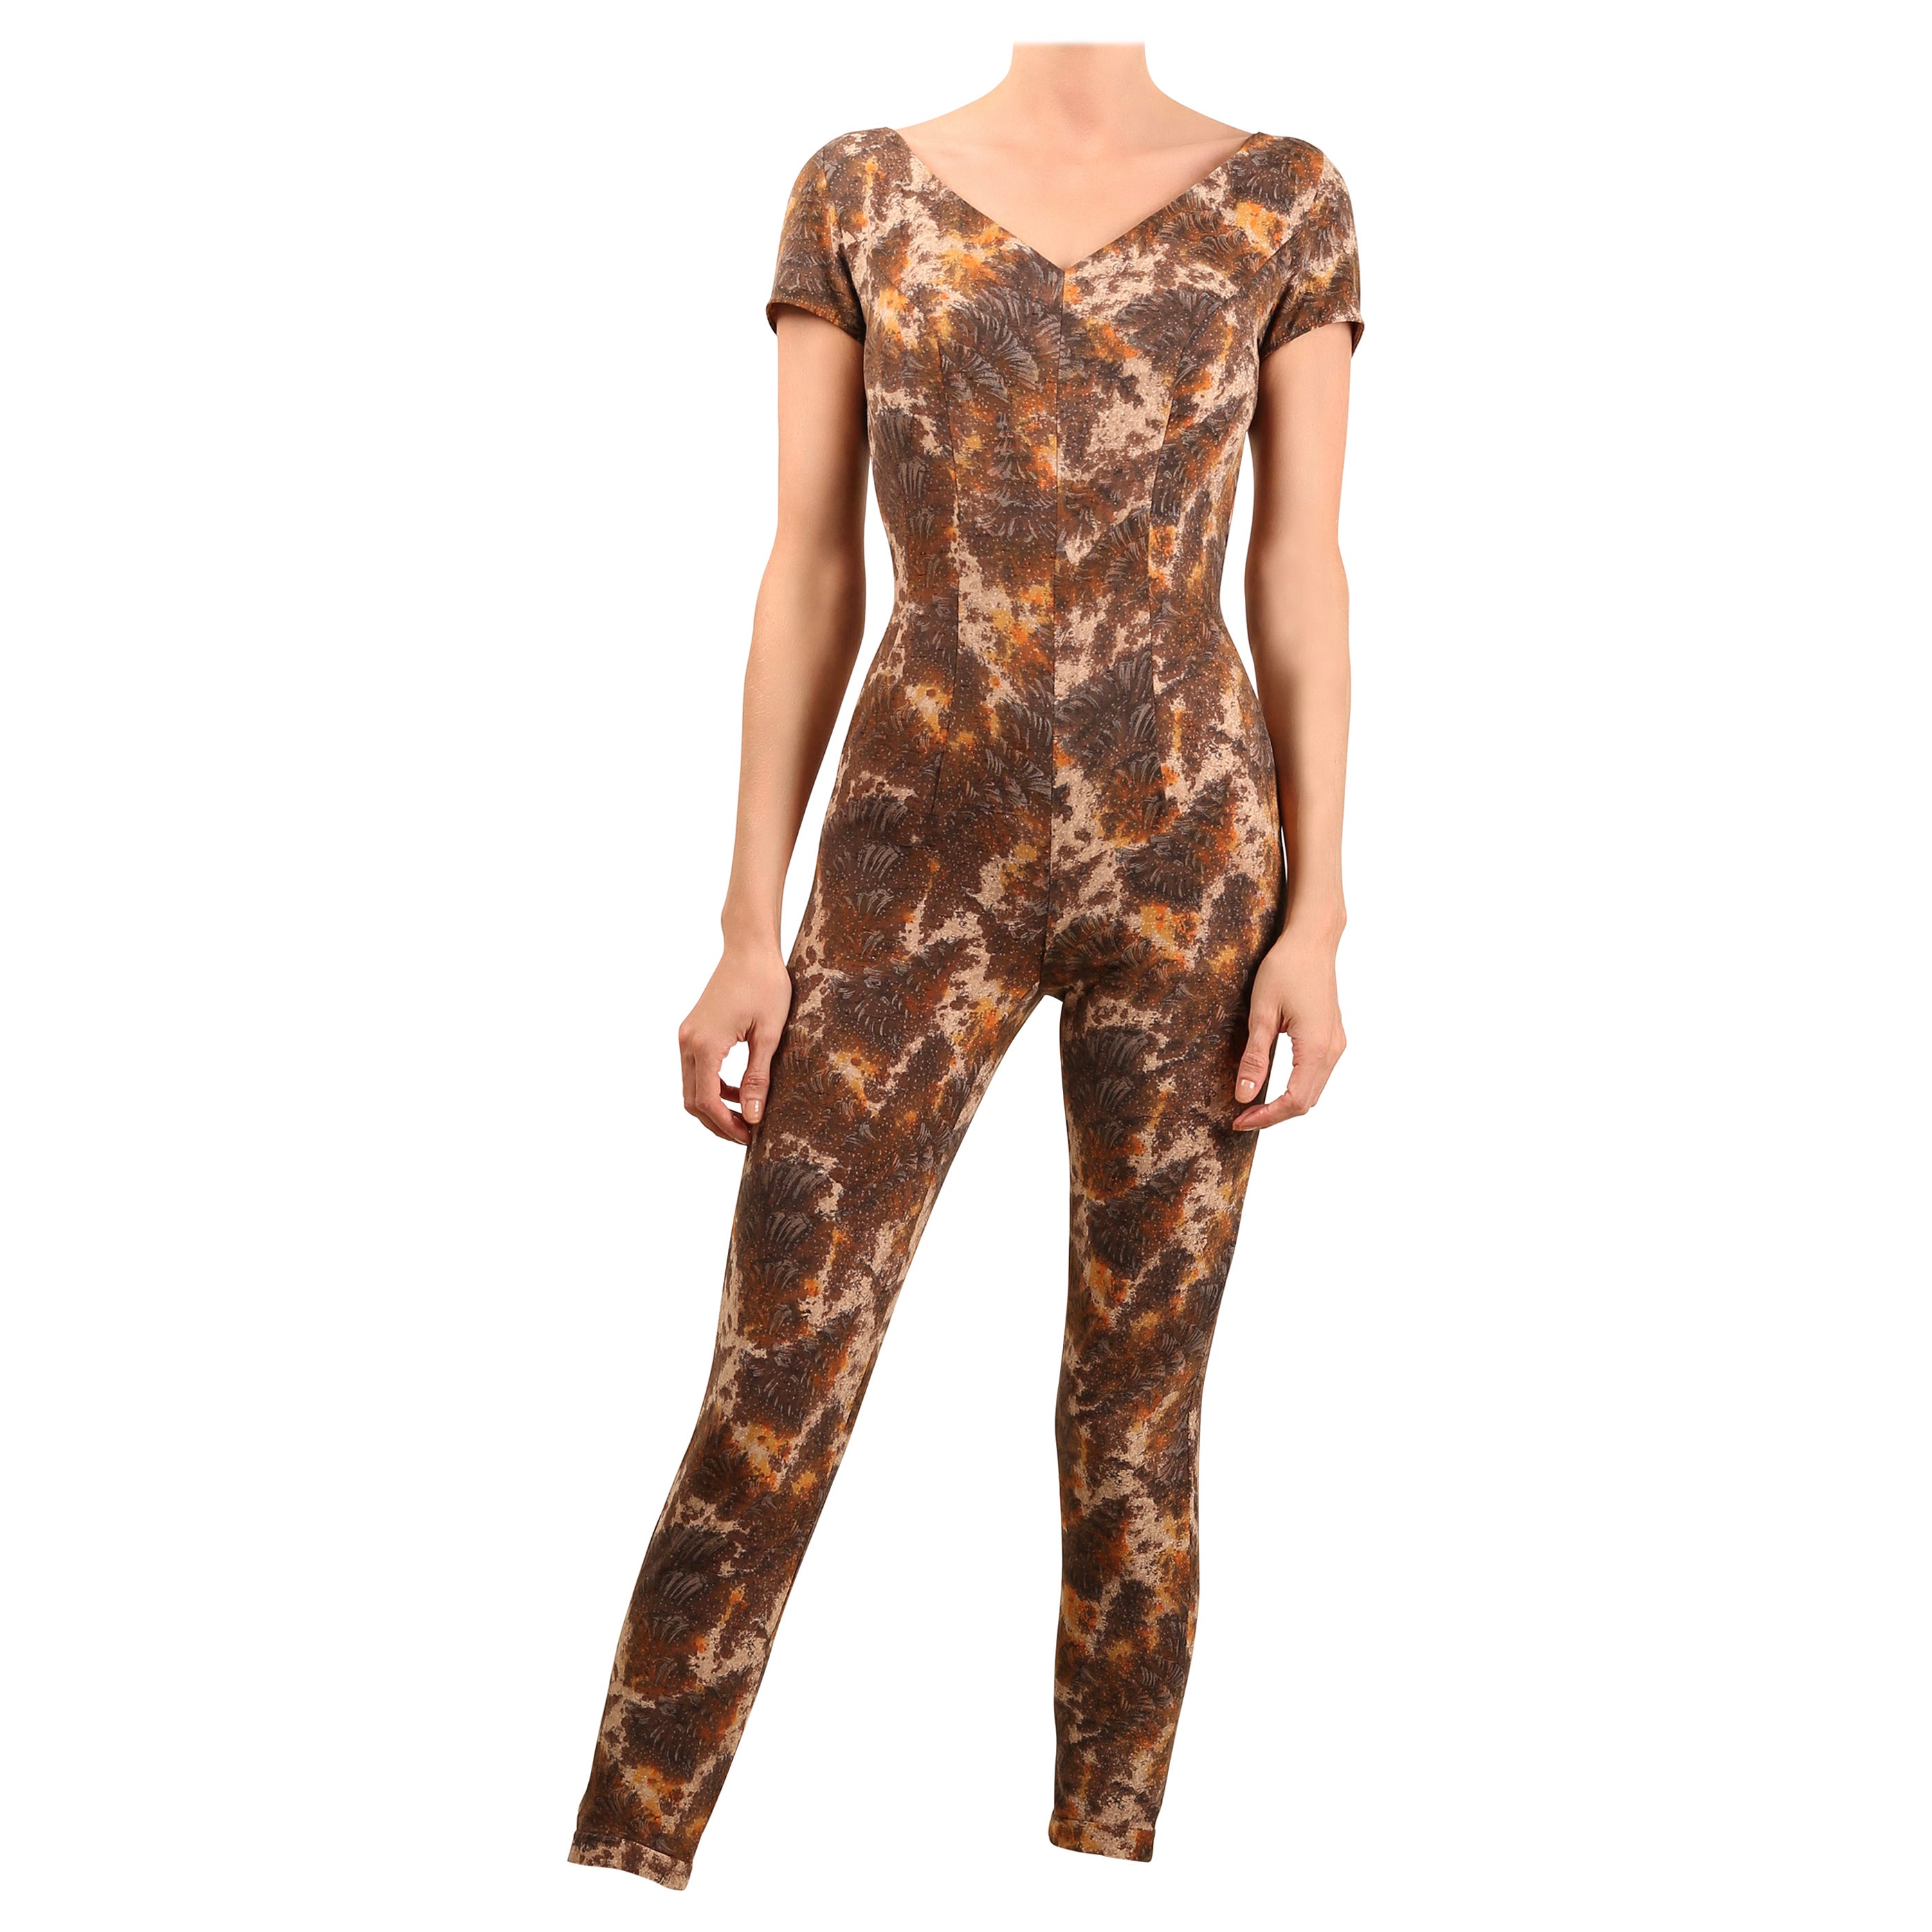 Emilio Pucci vintage fitted brown abstract print body con cat suit silk jumpsuit